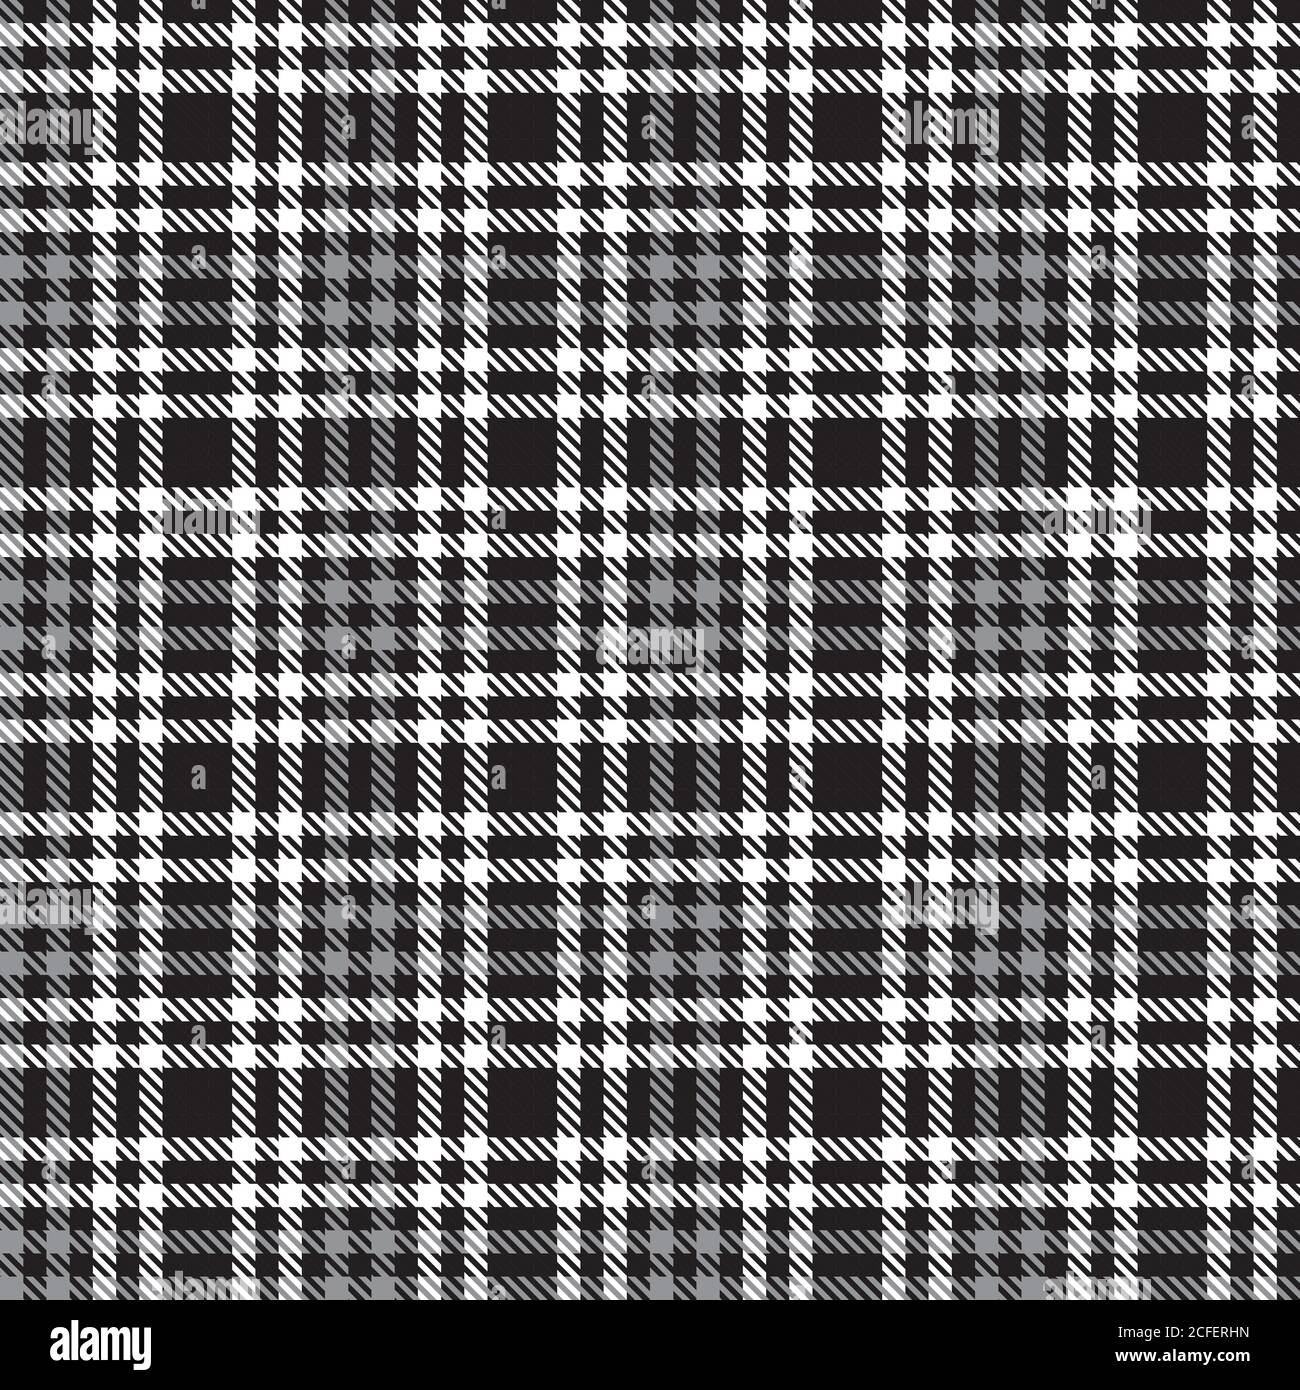 Glen Plaid textured seamless pattern suitable for fashion textiles and ...